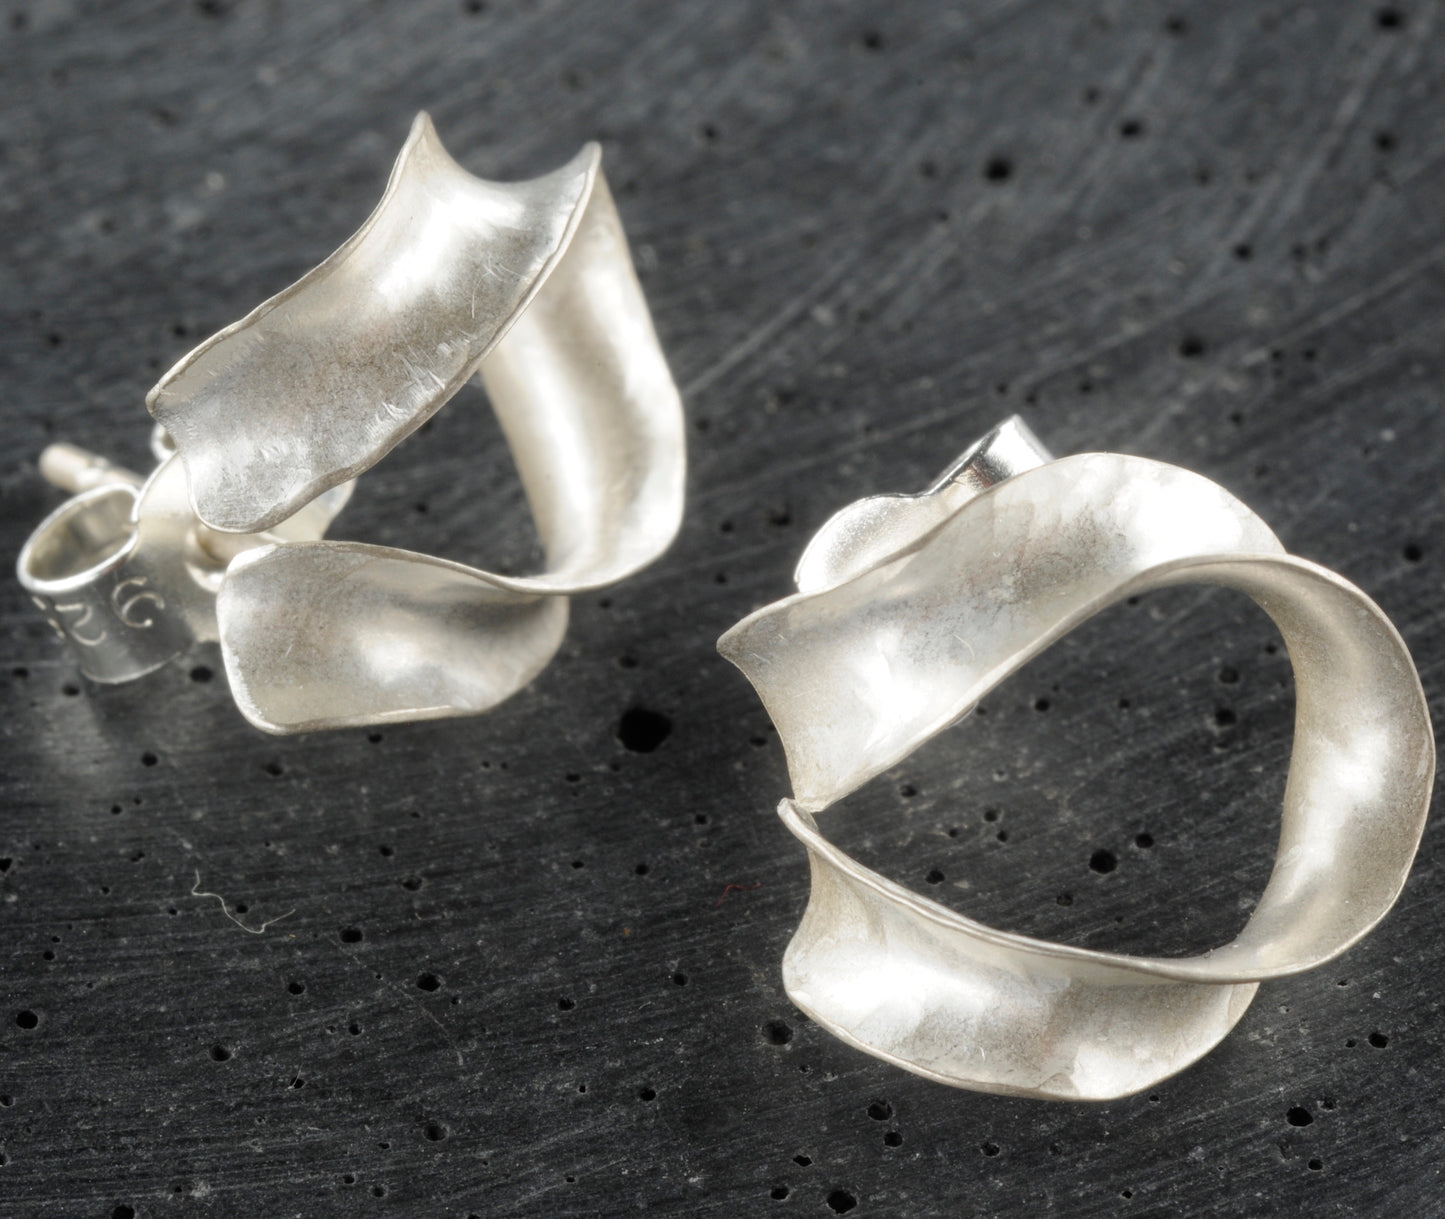 A pair of lightweight silver horseshoe earrings which curl gently below the earlobe. The different views show the three-dimensional curve. They fasten with a silver butterfly.